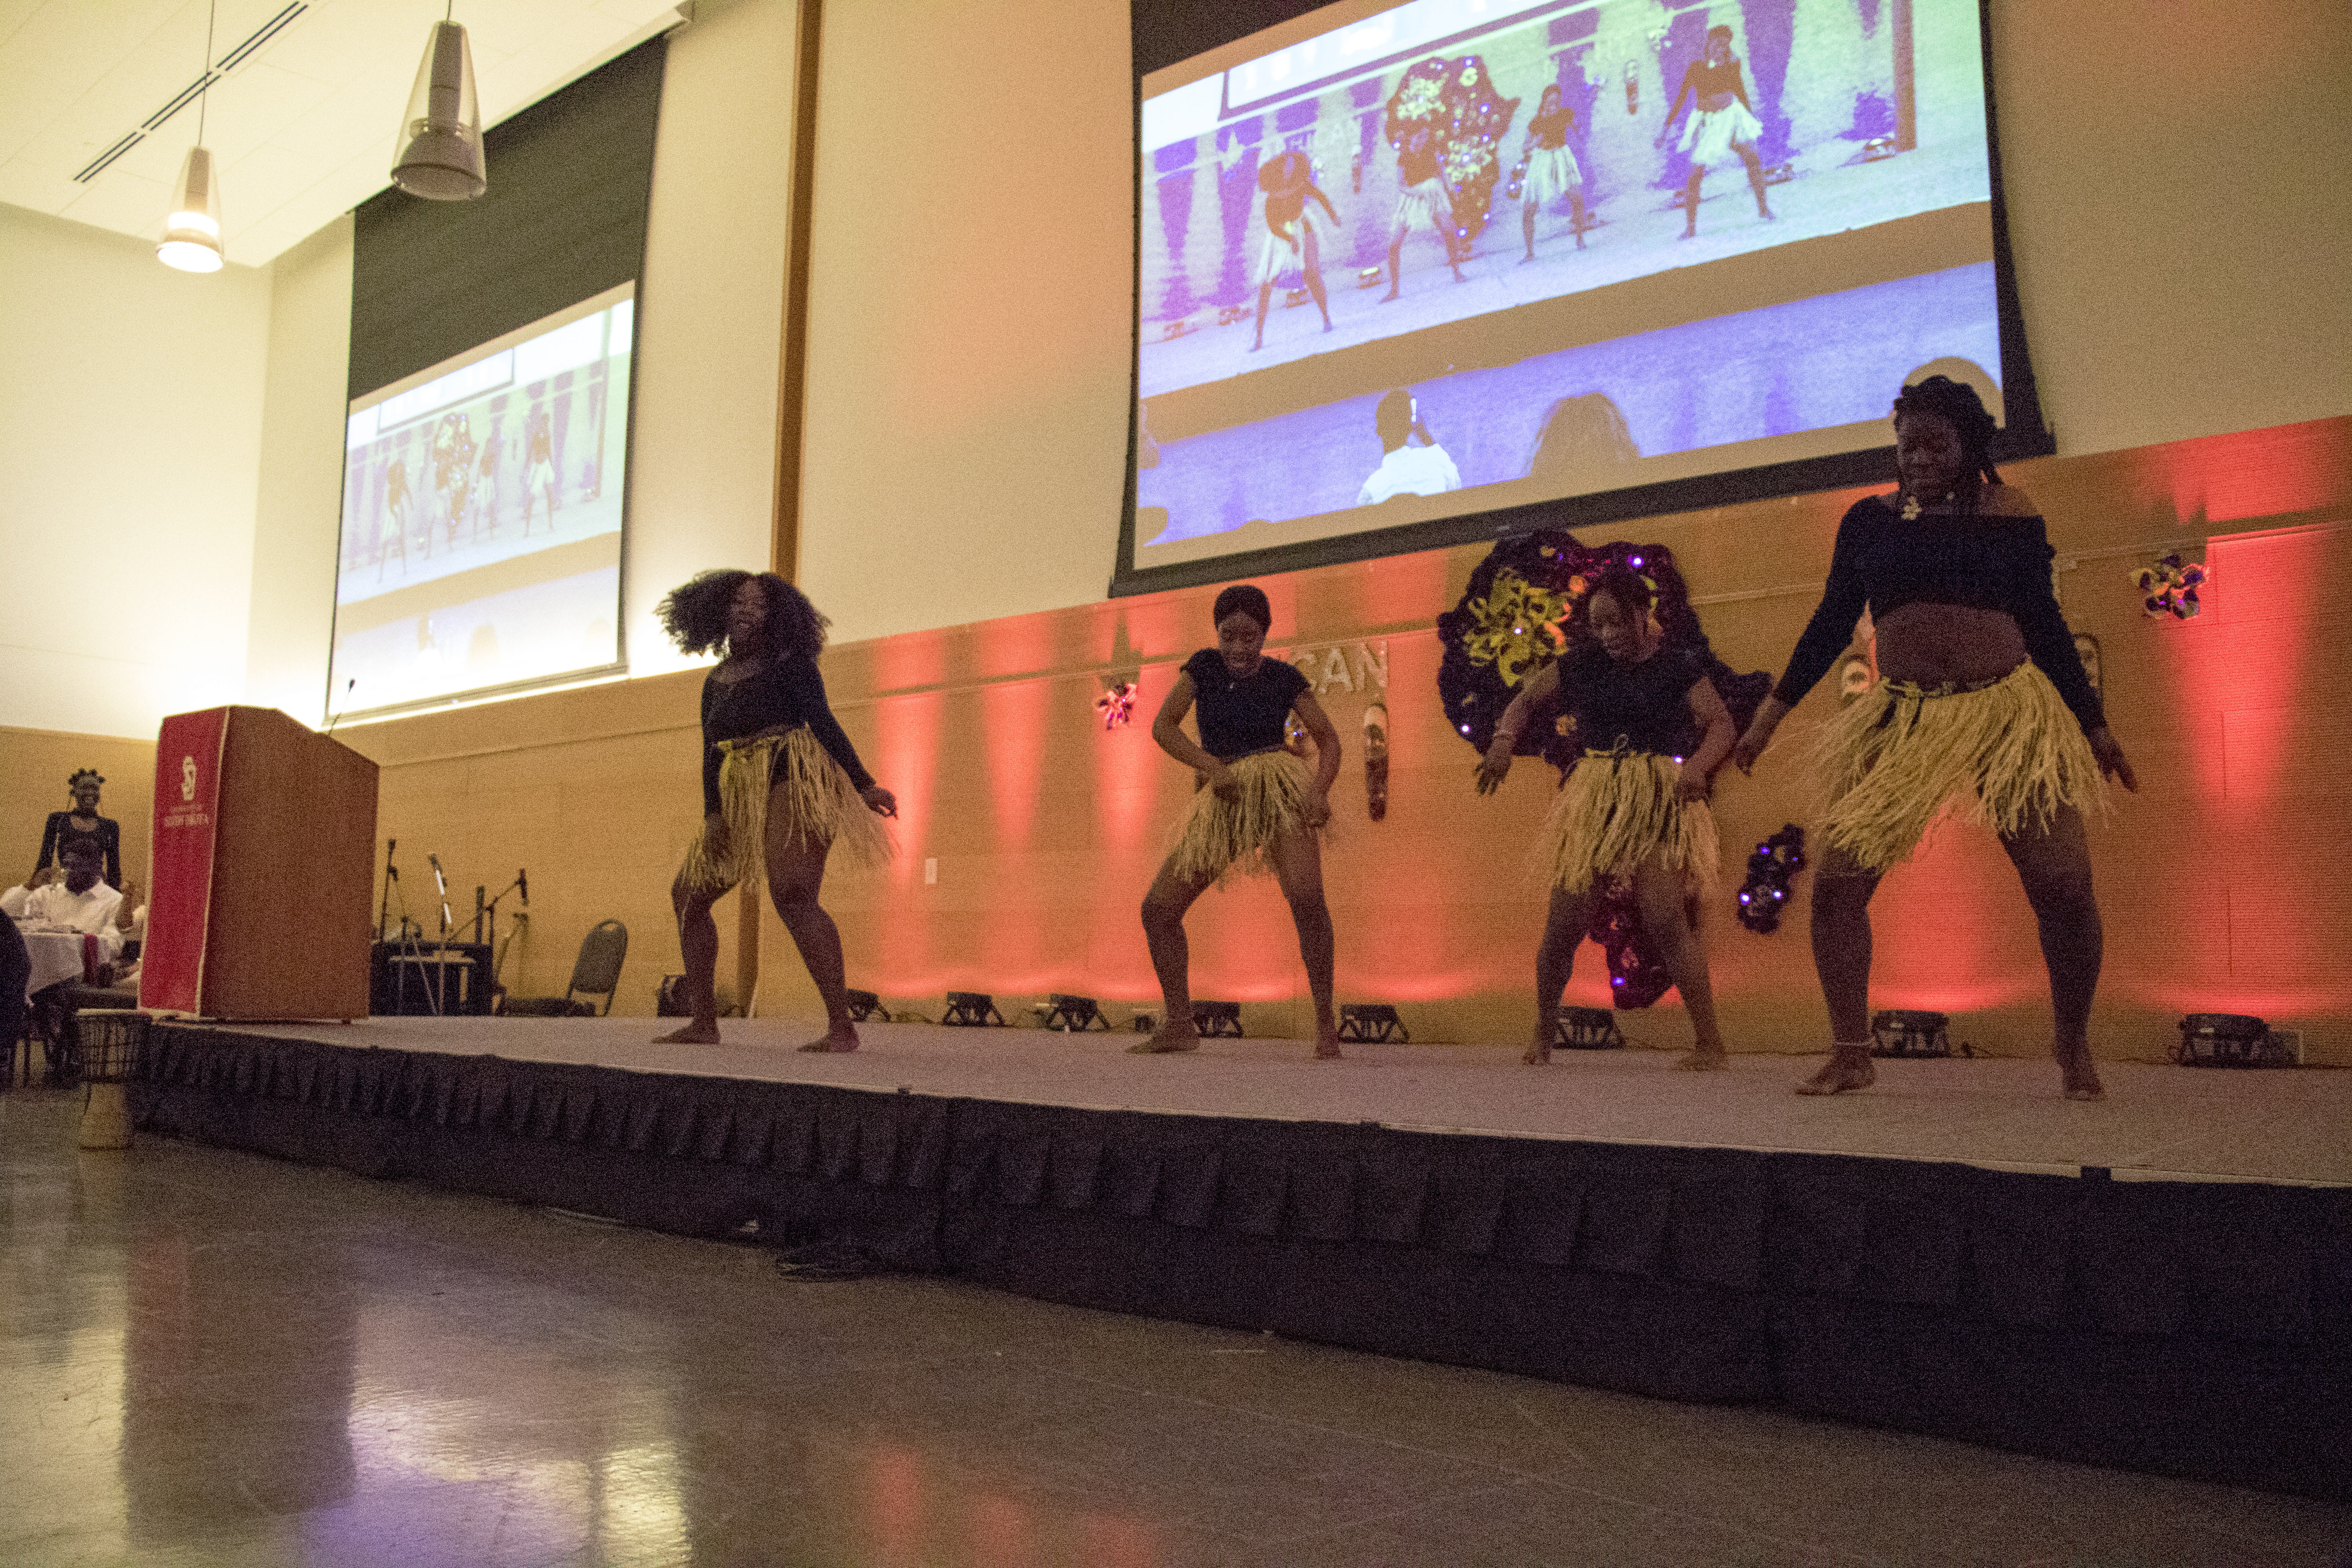 African Night students take an aim to embrace inclusiveness